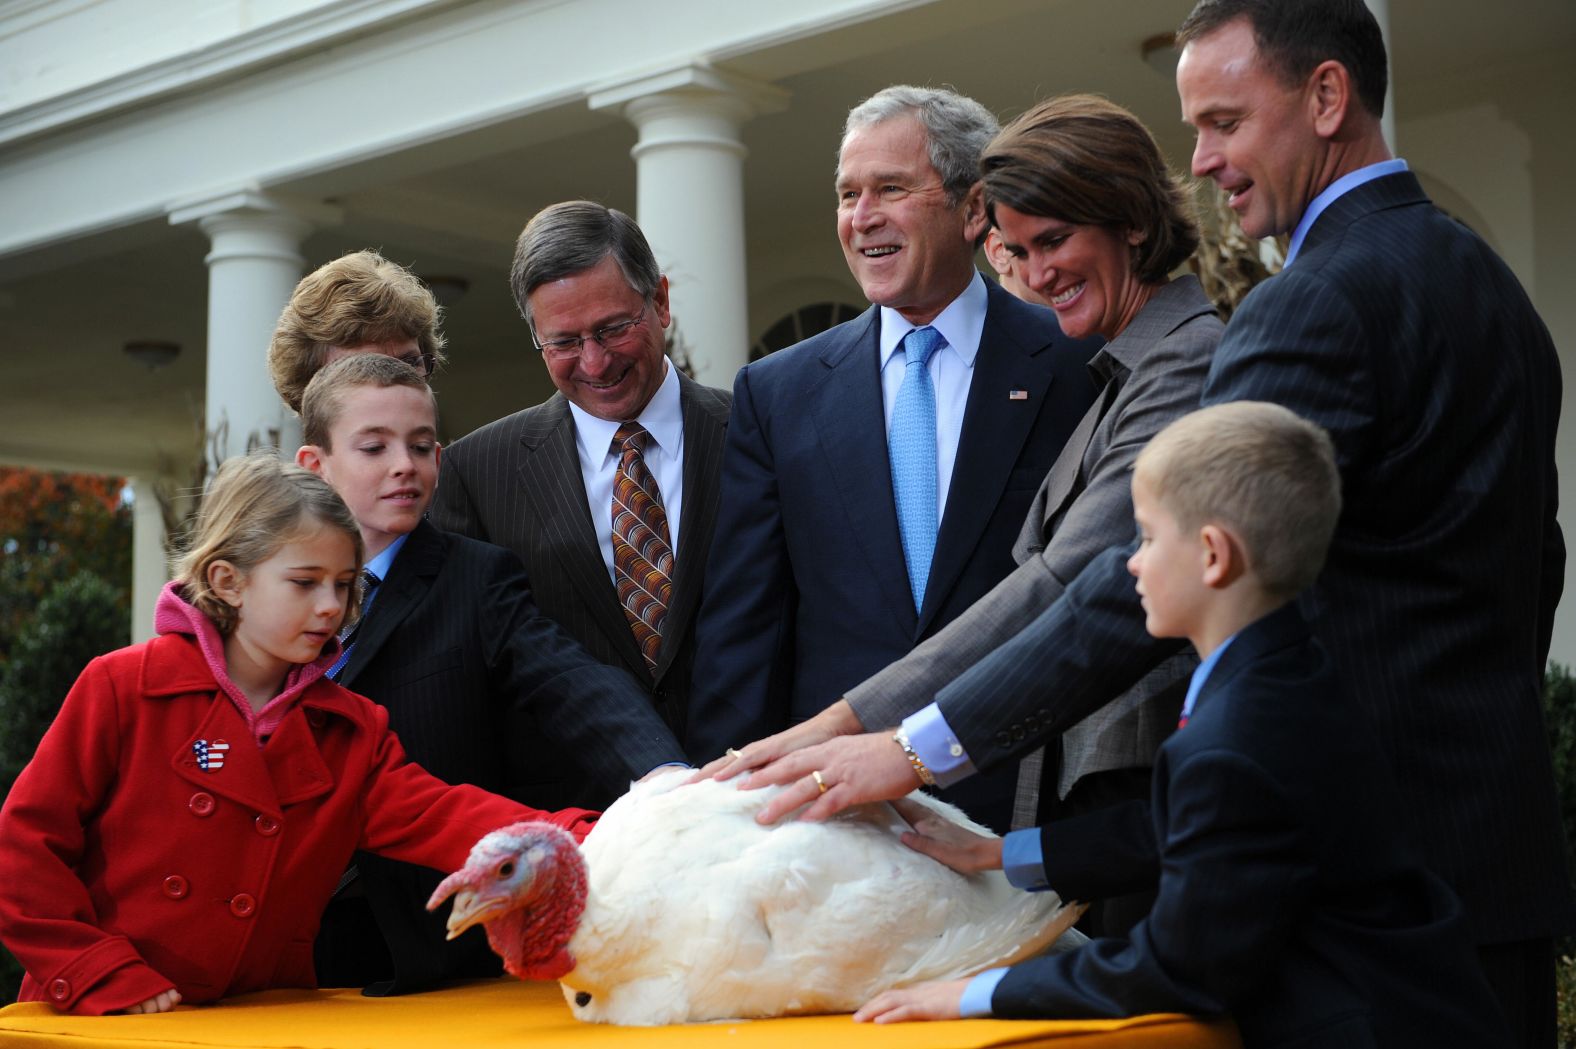 President George W. Bush stands with members of the Hill family, who raised Pumpkin the turkey, during Pumpkin's pardoning ceremony in 2008.